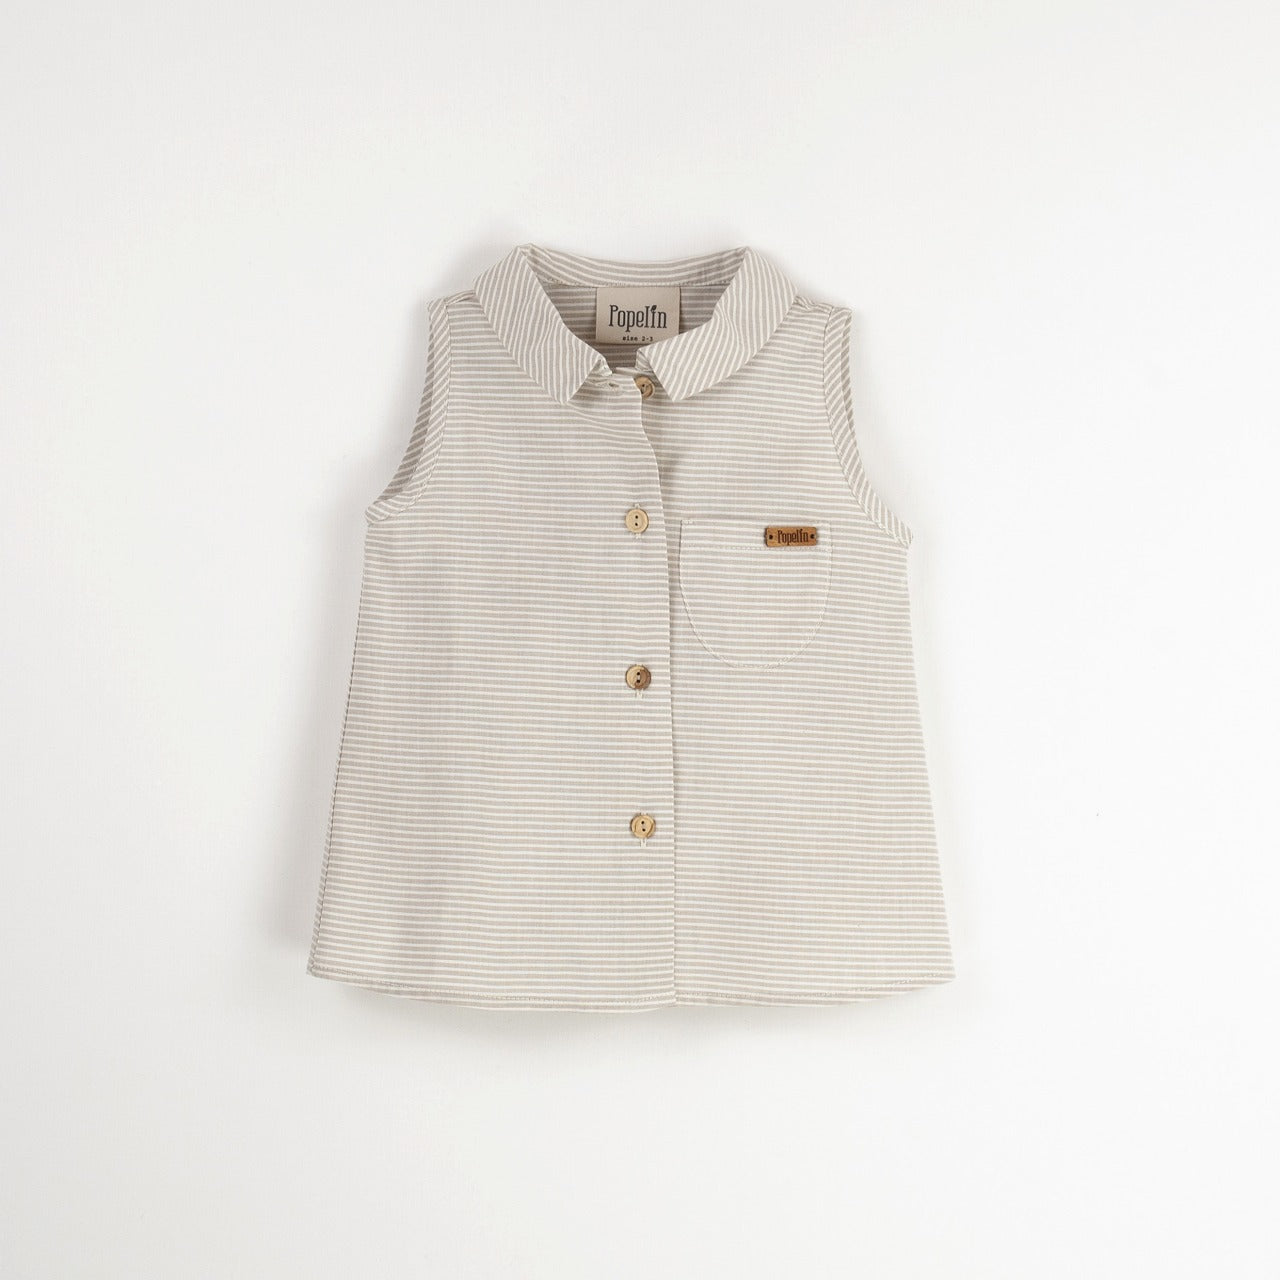 【Popelin】【30%OFF】Sand striped sleeveless shirt ノースリーブシャツ 12/18m,18/24m,2/3y,3/4y  | Coucoubebe/ククベベ